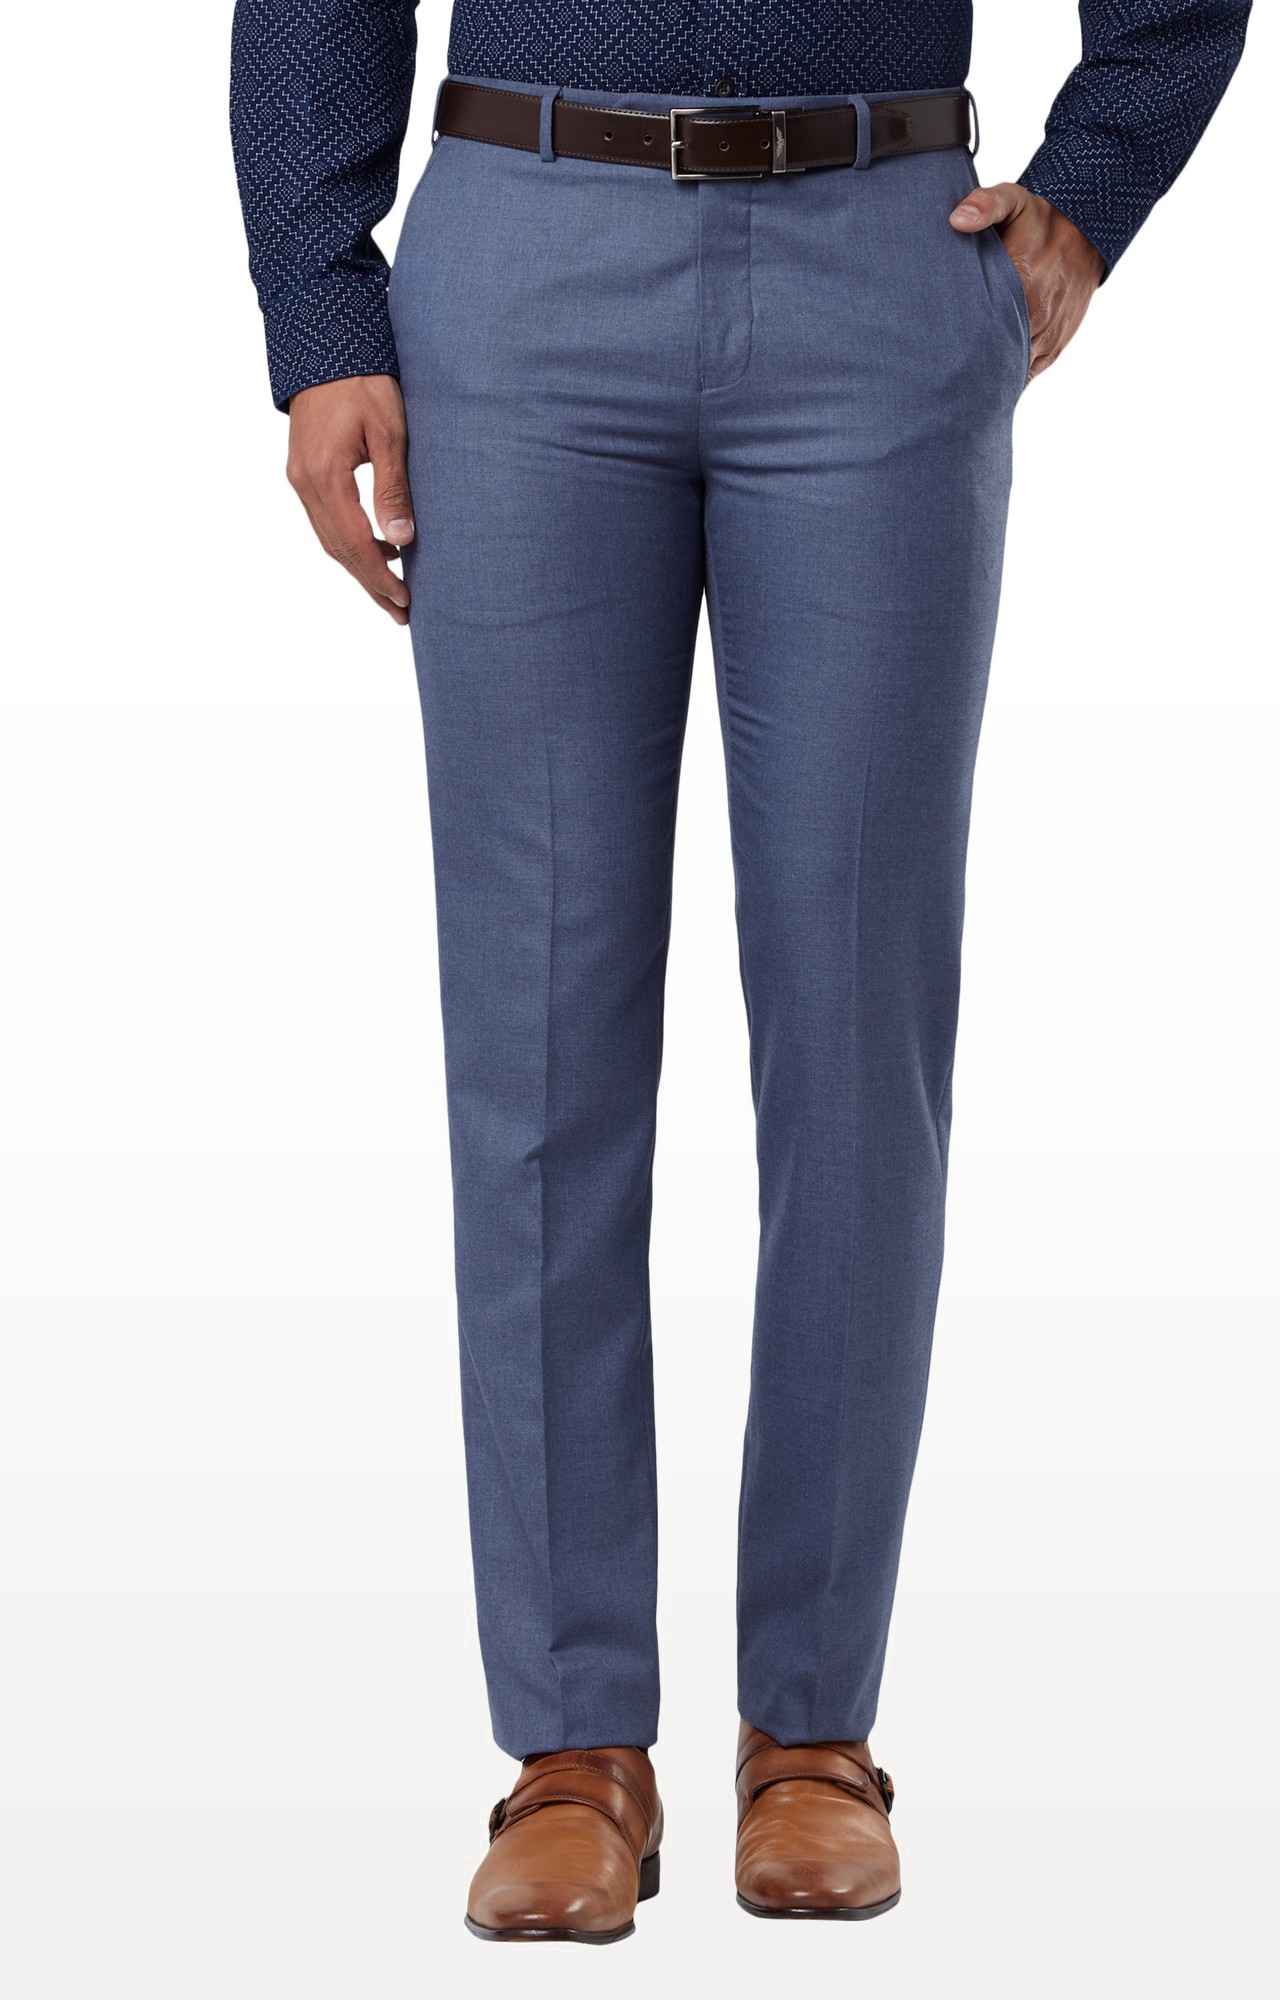 Grey Flat Front Formal Trousers